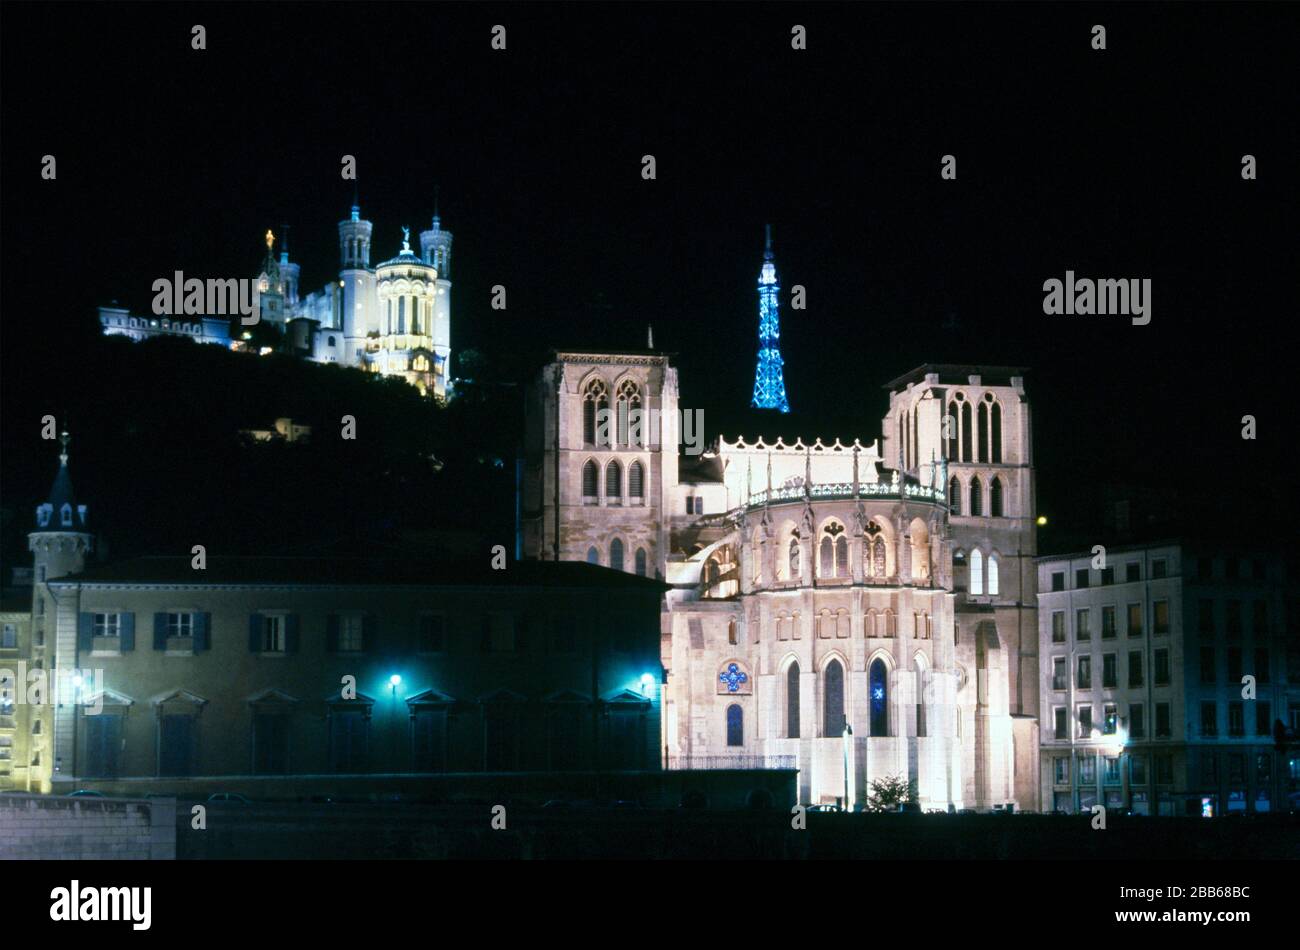 Lyon France City at night - Lyon Cathedral overlooked by Basilica Of Notre-Dame de Fourviere Stock Photo